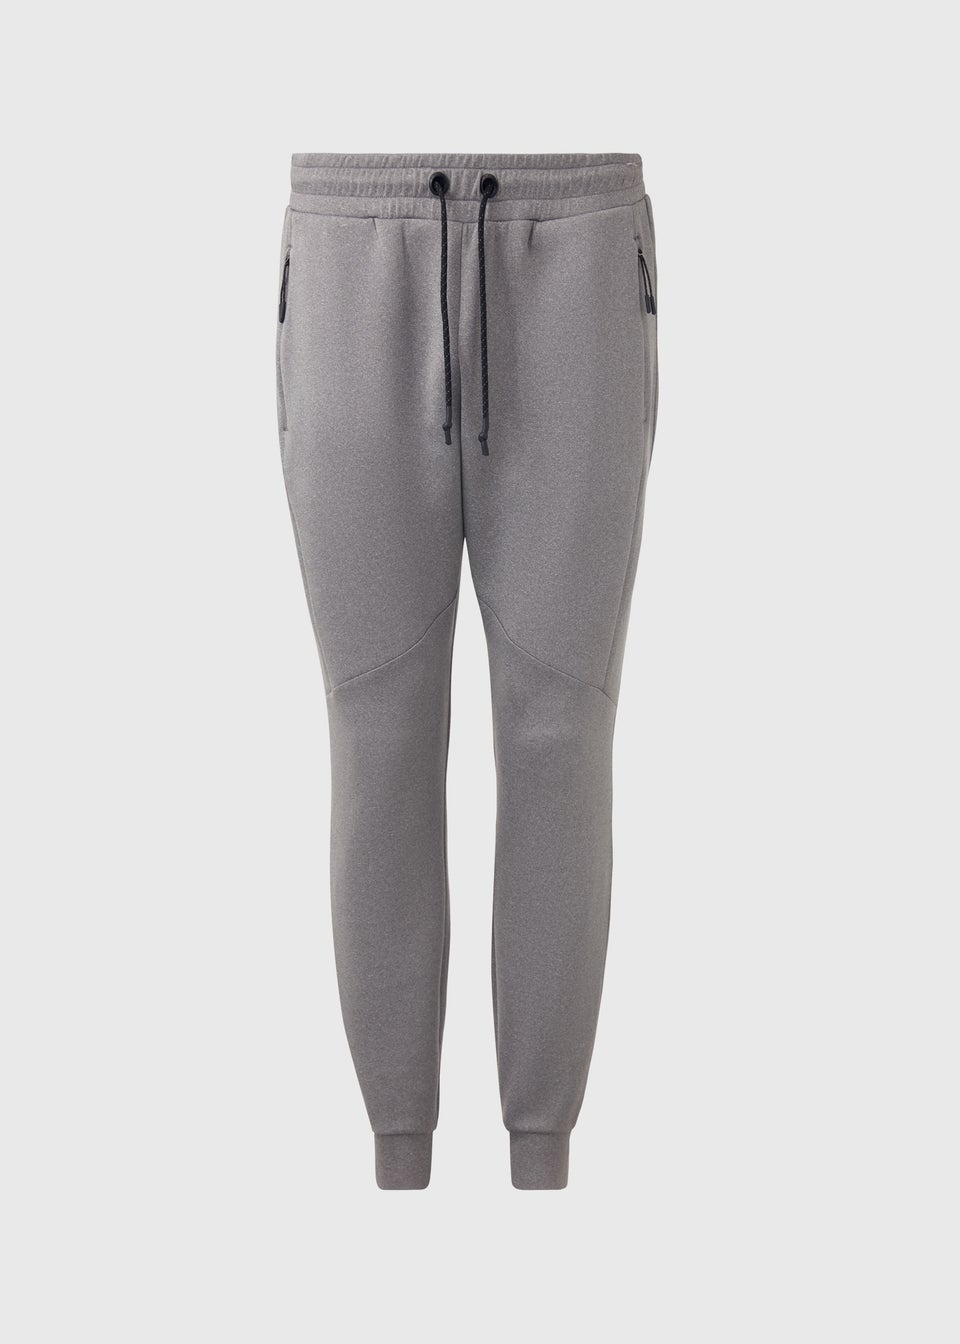 US Athletic Light Grey Two Tone Bonded Joggers